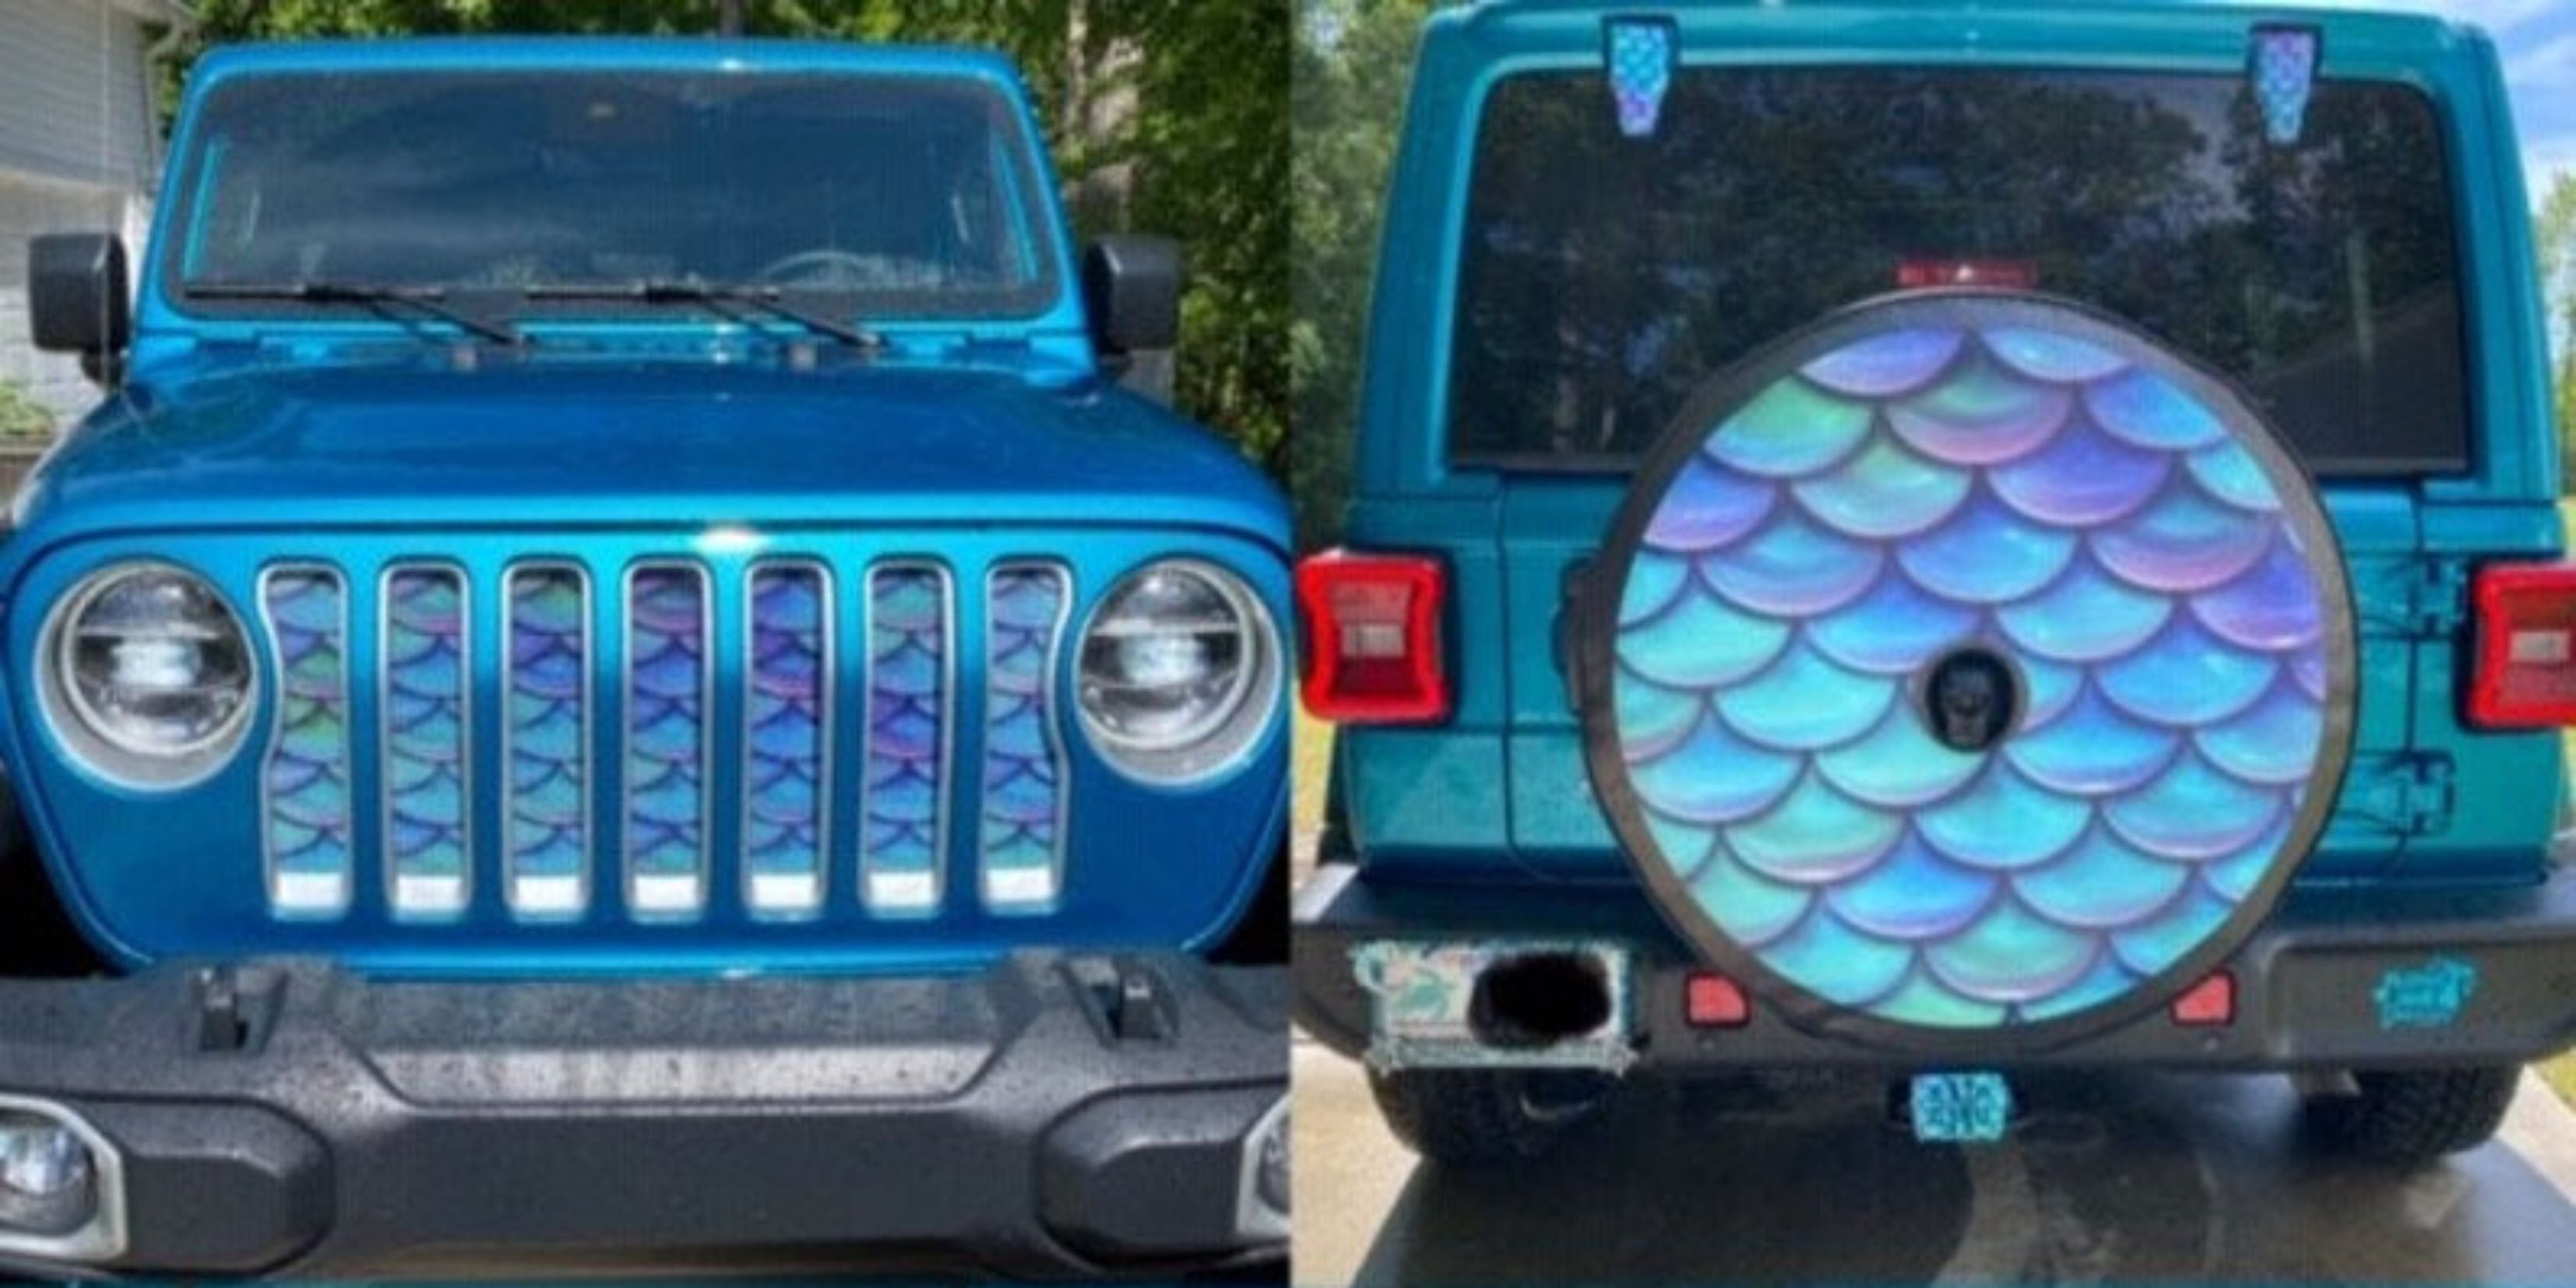 Mermaid Scales Jeep Grille Insert